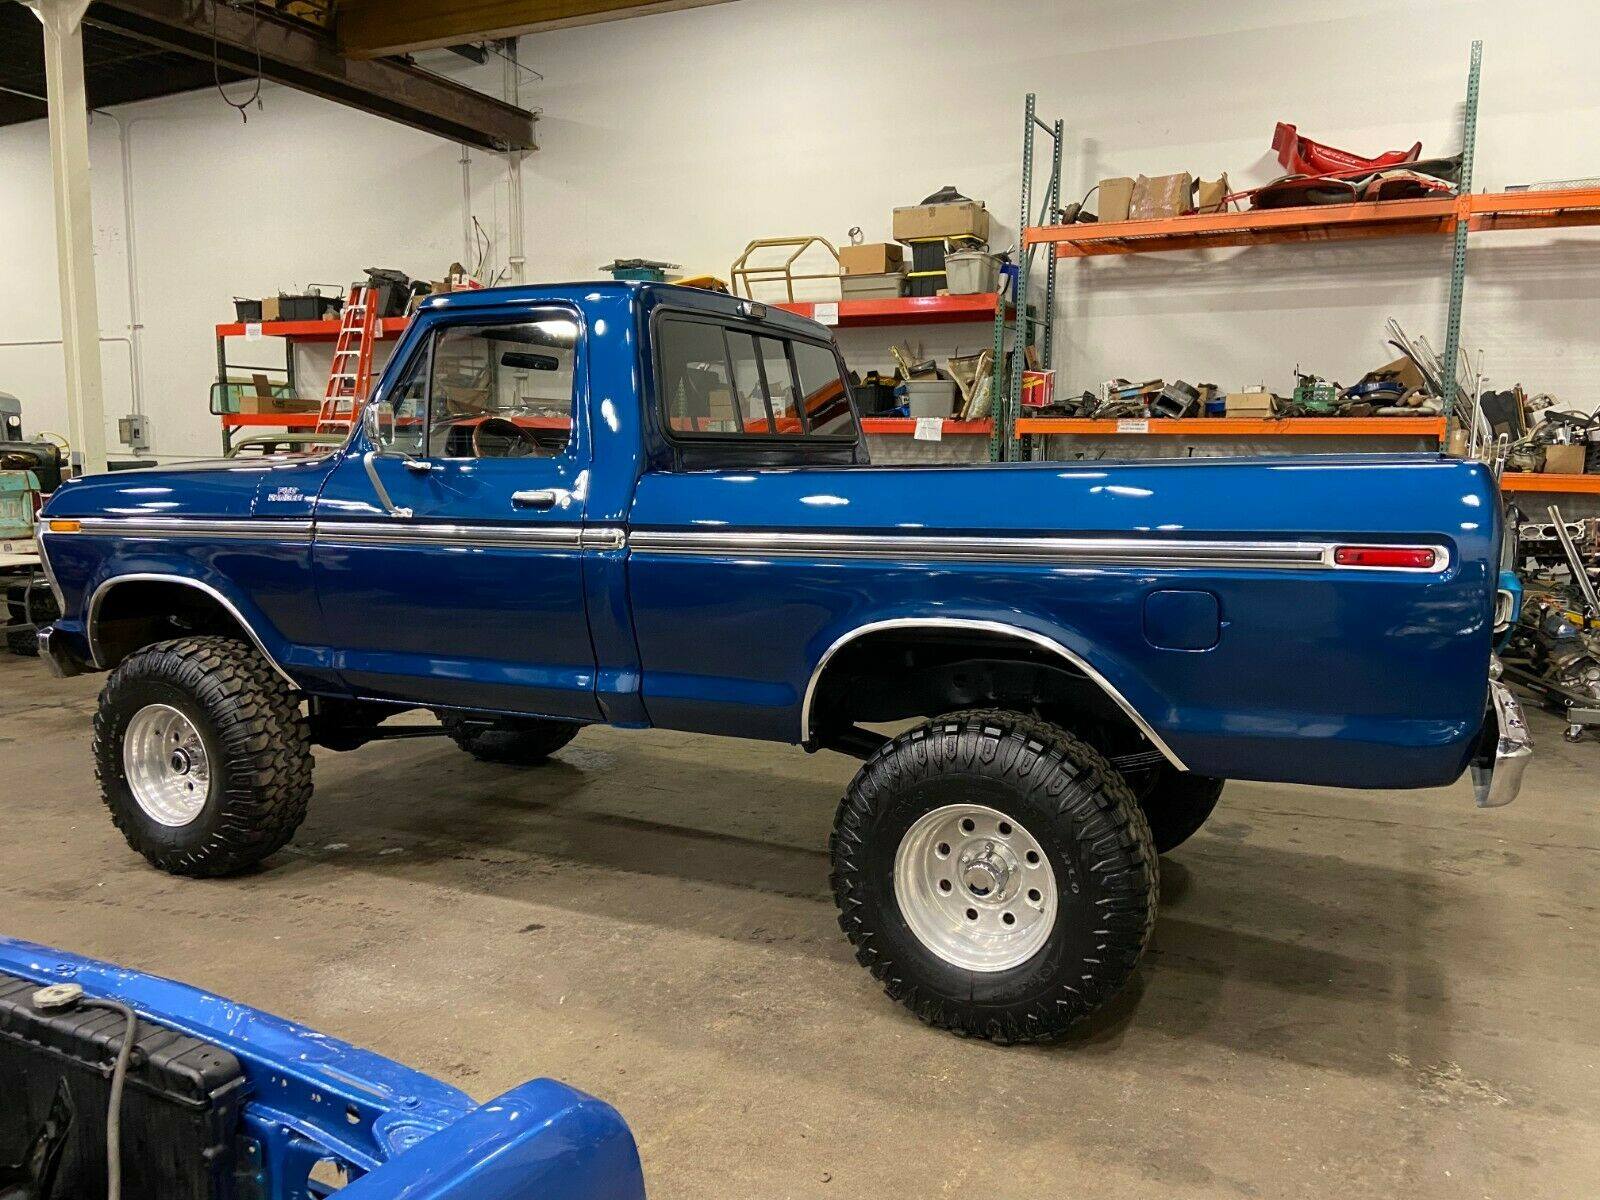 1977 Ford F-150 Ranger 4-inch lift With a 460 4x4 Midnight Blue 2 FordDaily.net